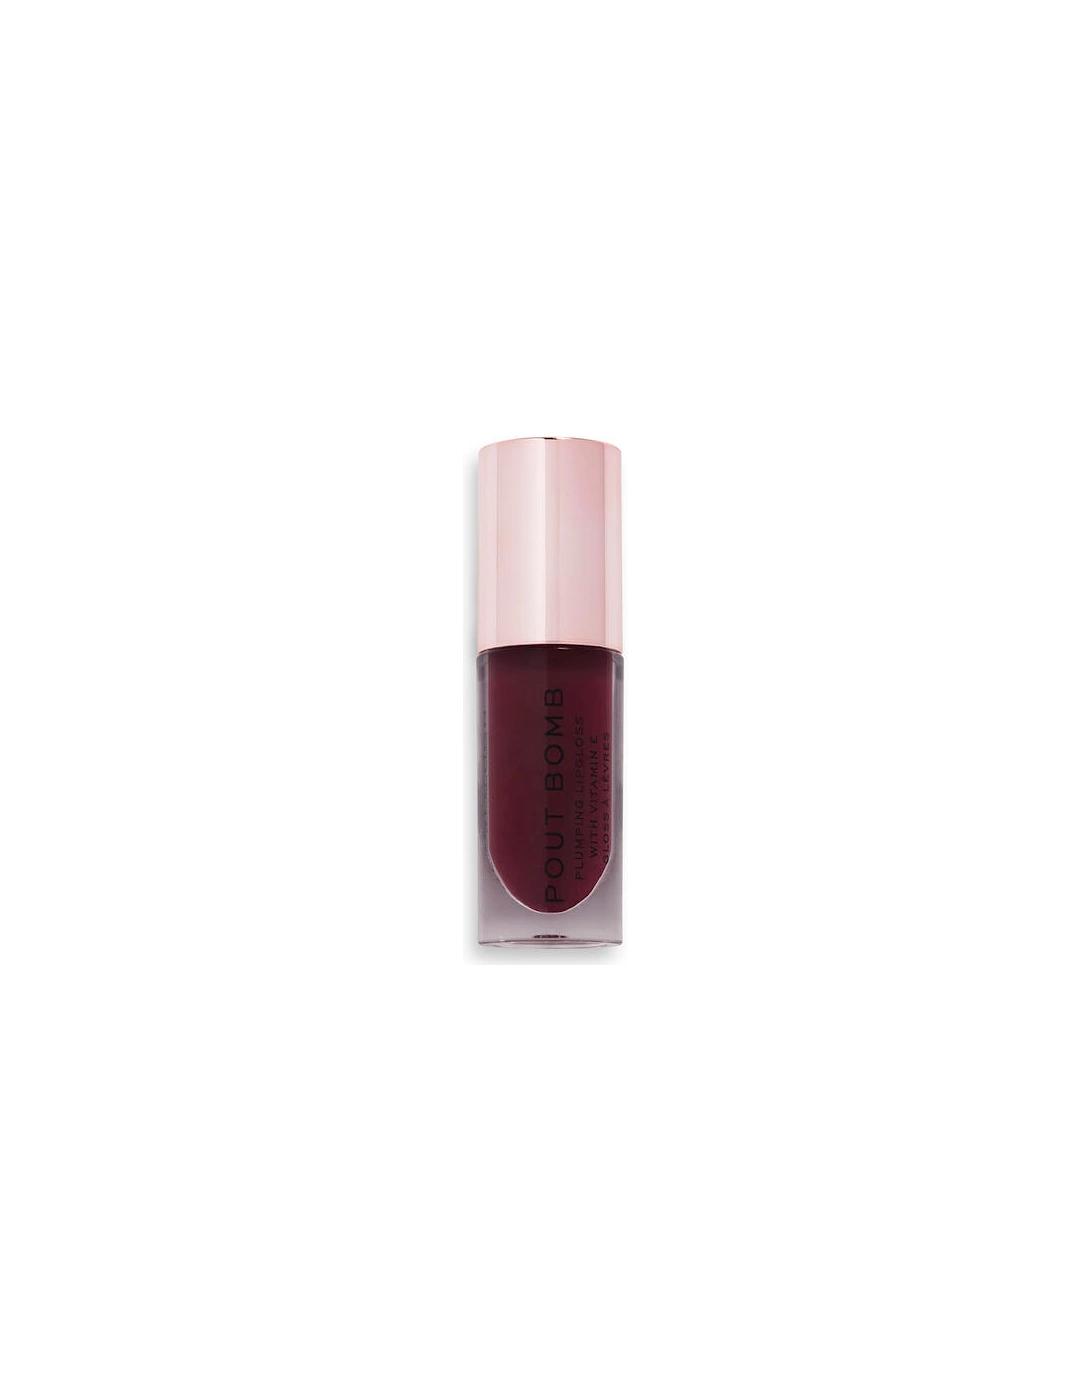 Pout Bomb Daring Plum, 2 of 1